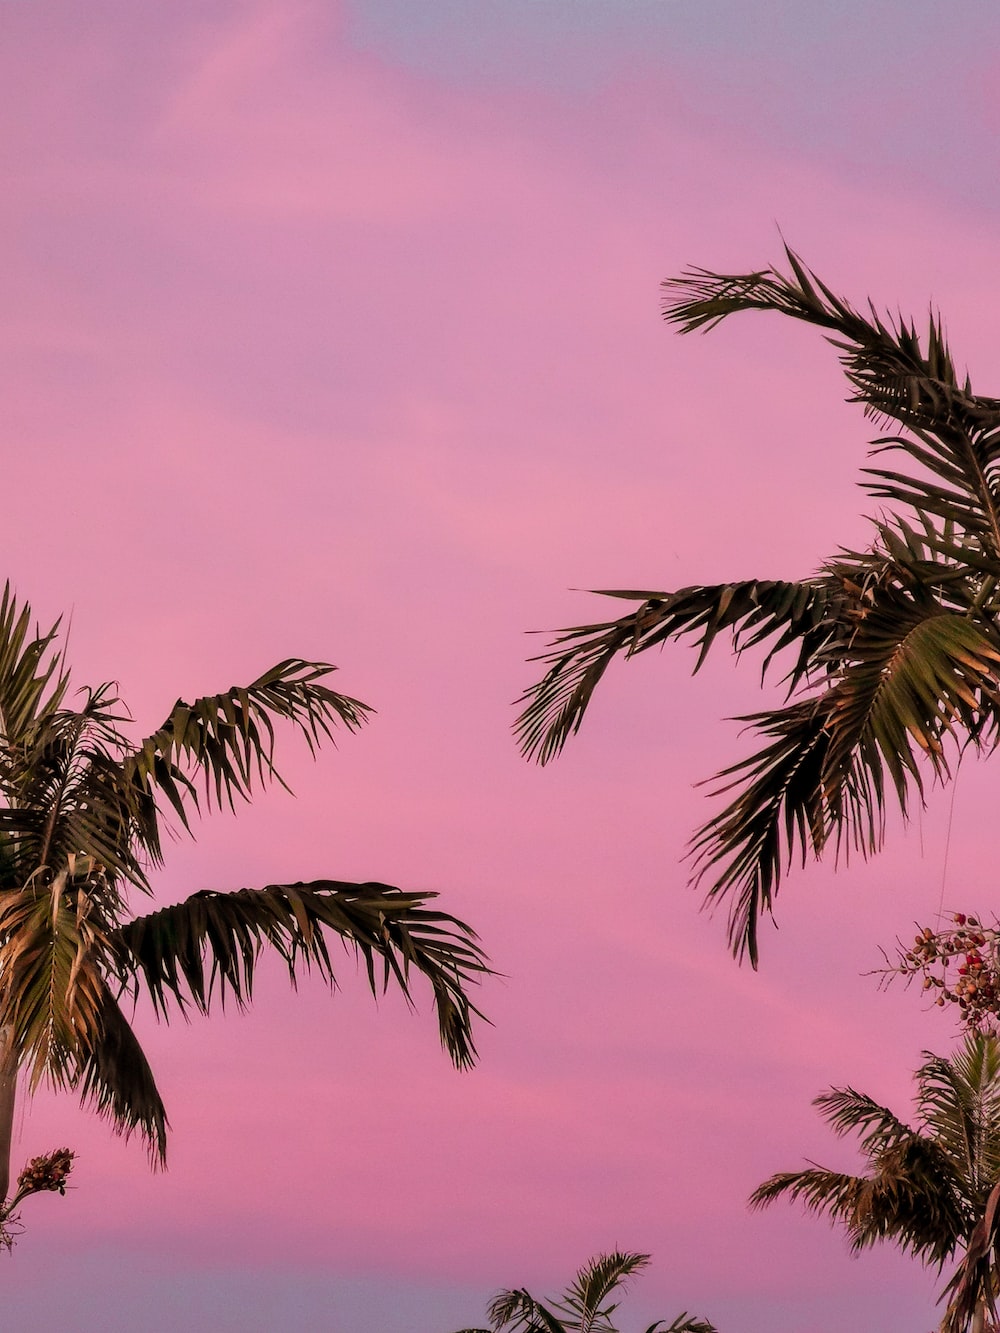 Pink aesthetic pictures download free images on